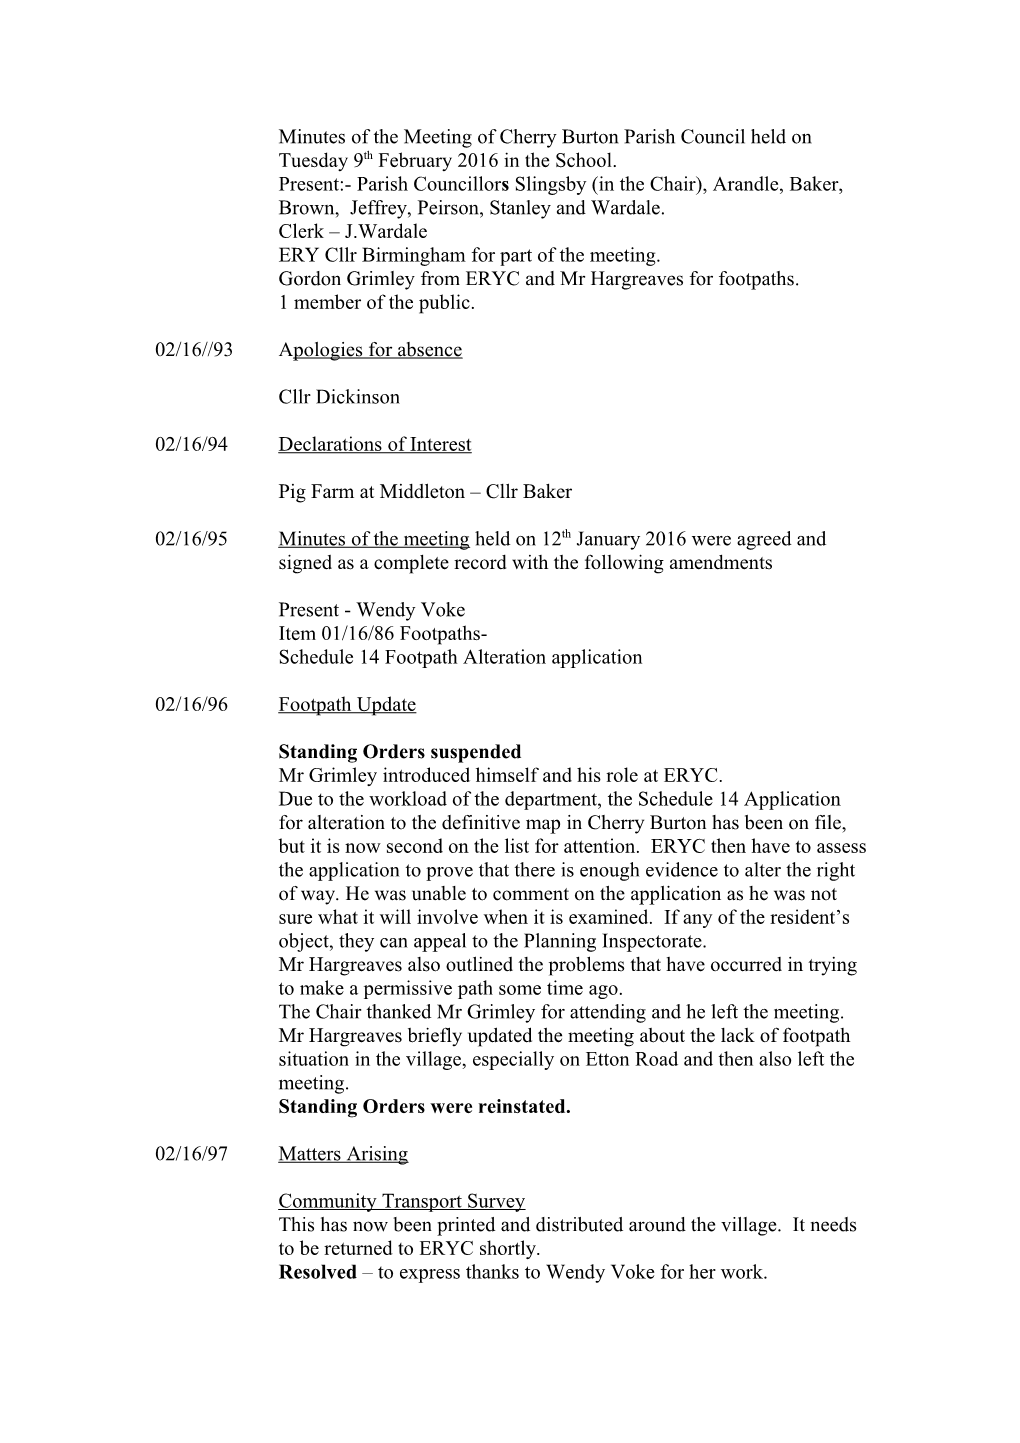 Minutes of the Annual Meeting of Cherry Burton Parish Council Held on Tuesday 12Th May 2009